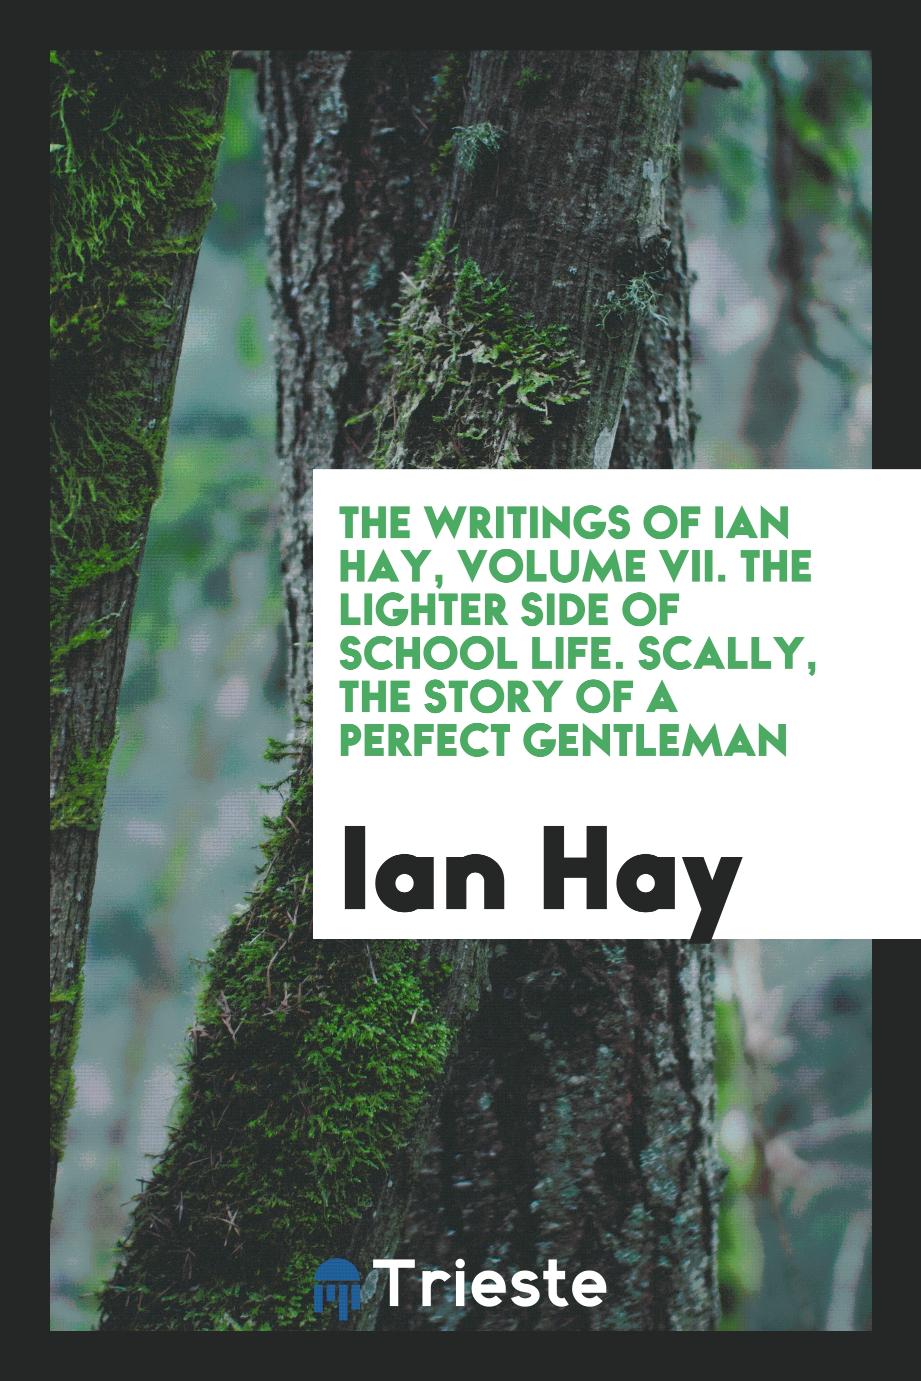 The Writings of Ian Hay, Volume VII. The Lighter Side of School Life. Scally, the Story of a Perfect Gentleman